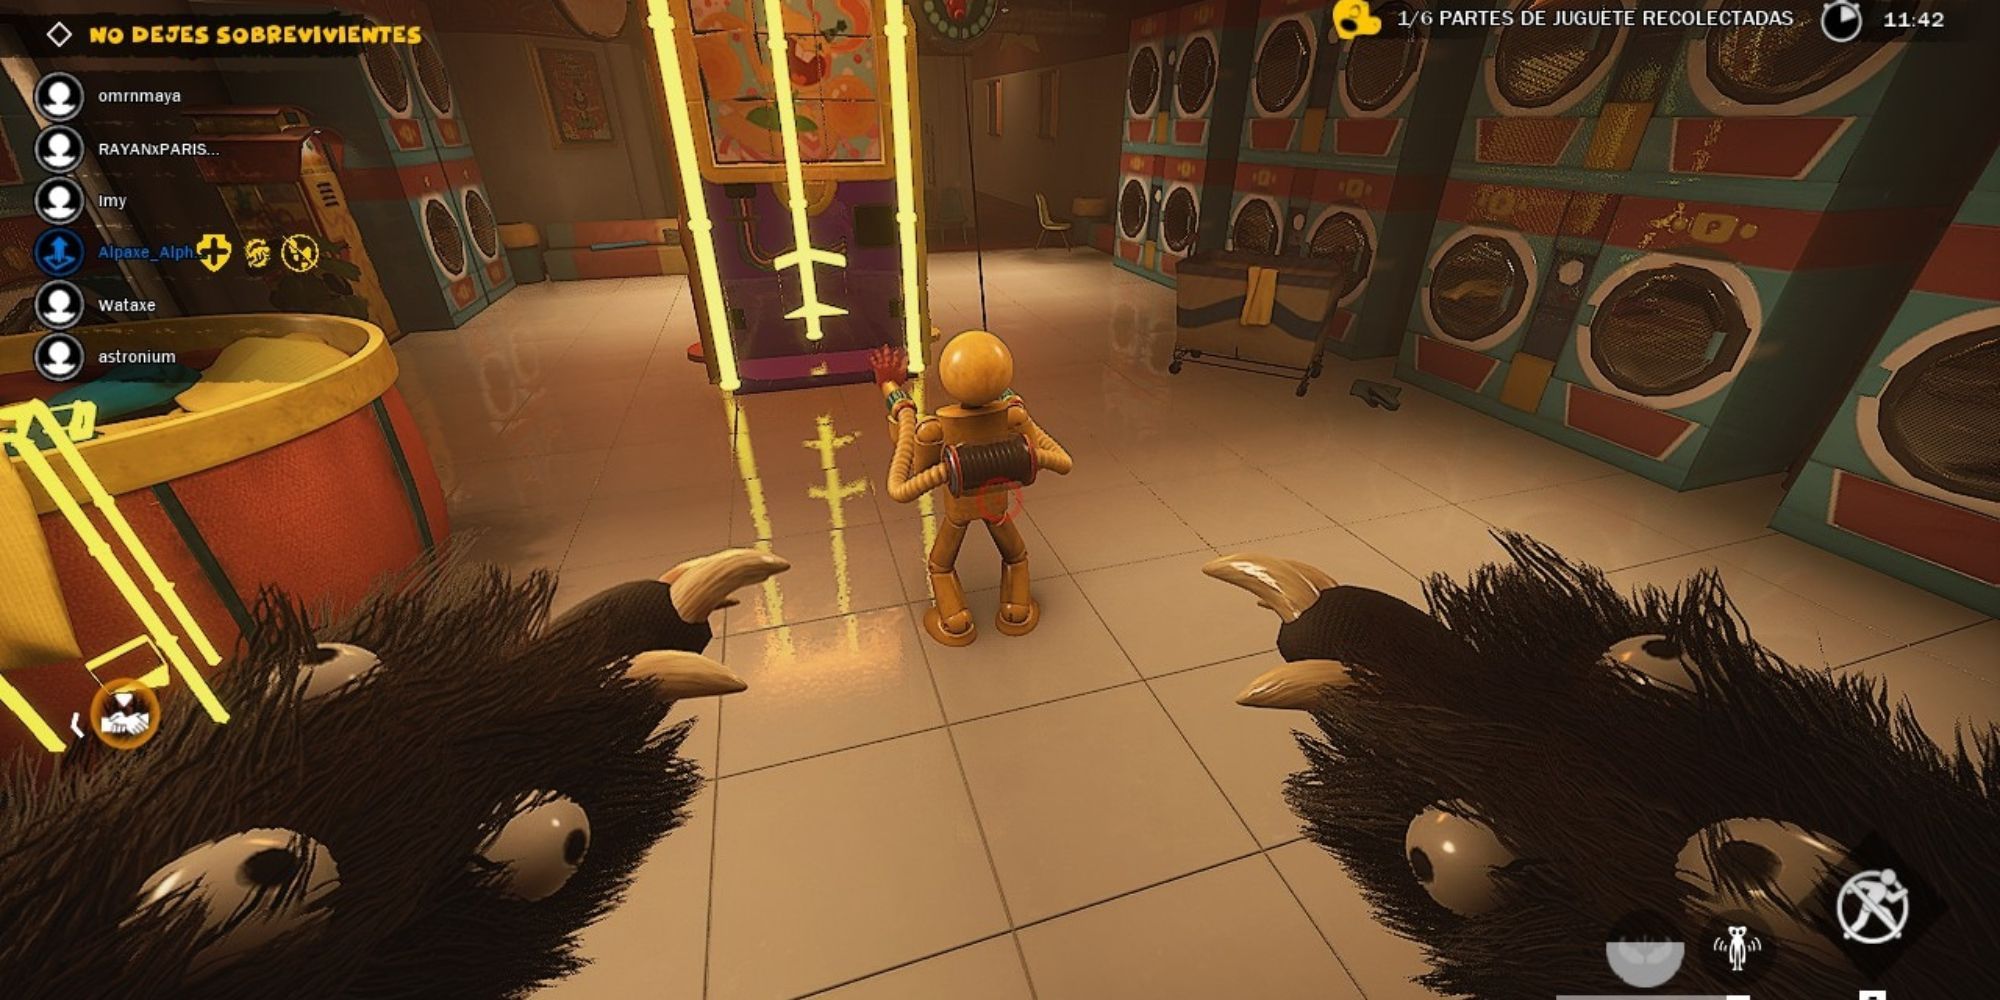 A hairy monster with eyeballs across its arms about to attack a survivor in Project: Playtime.